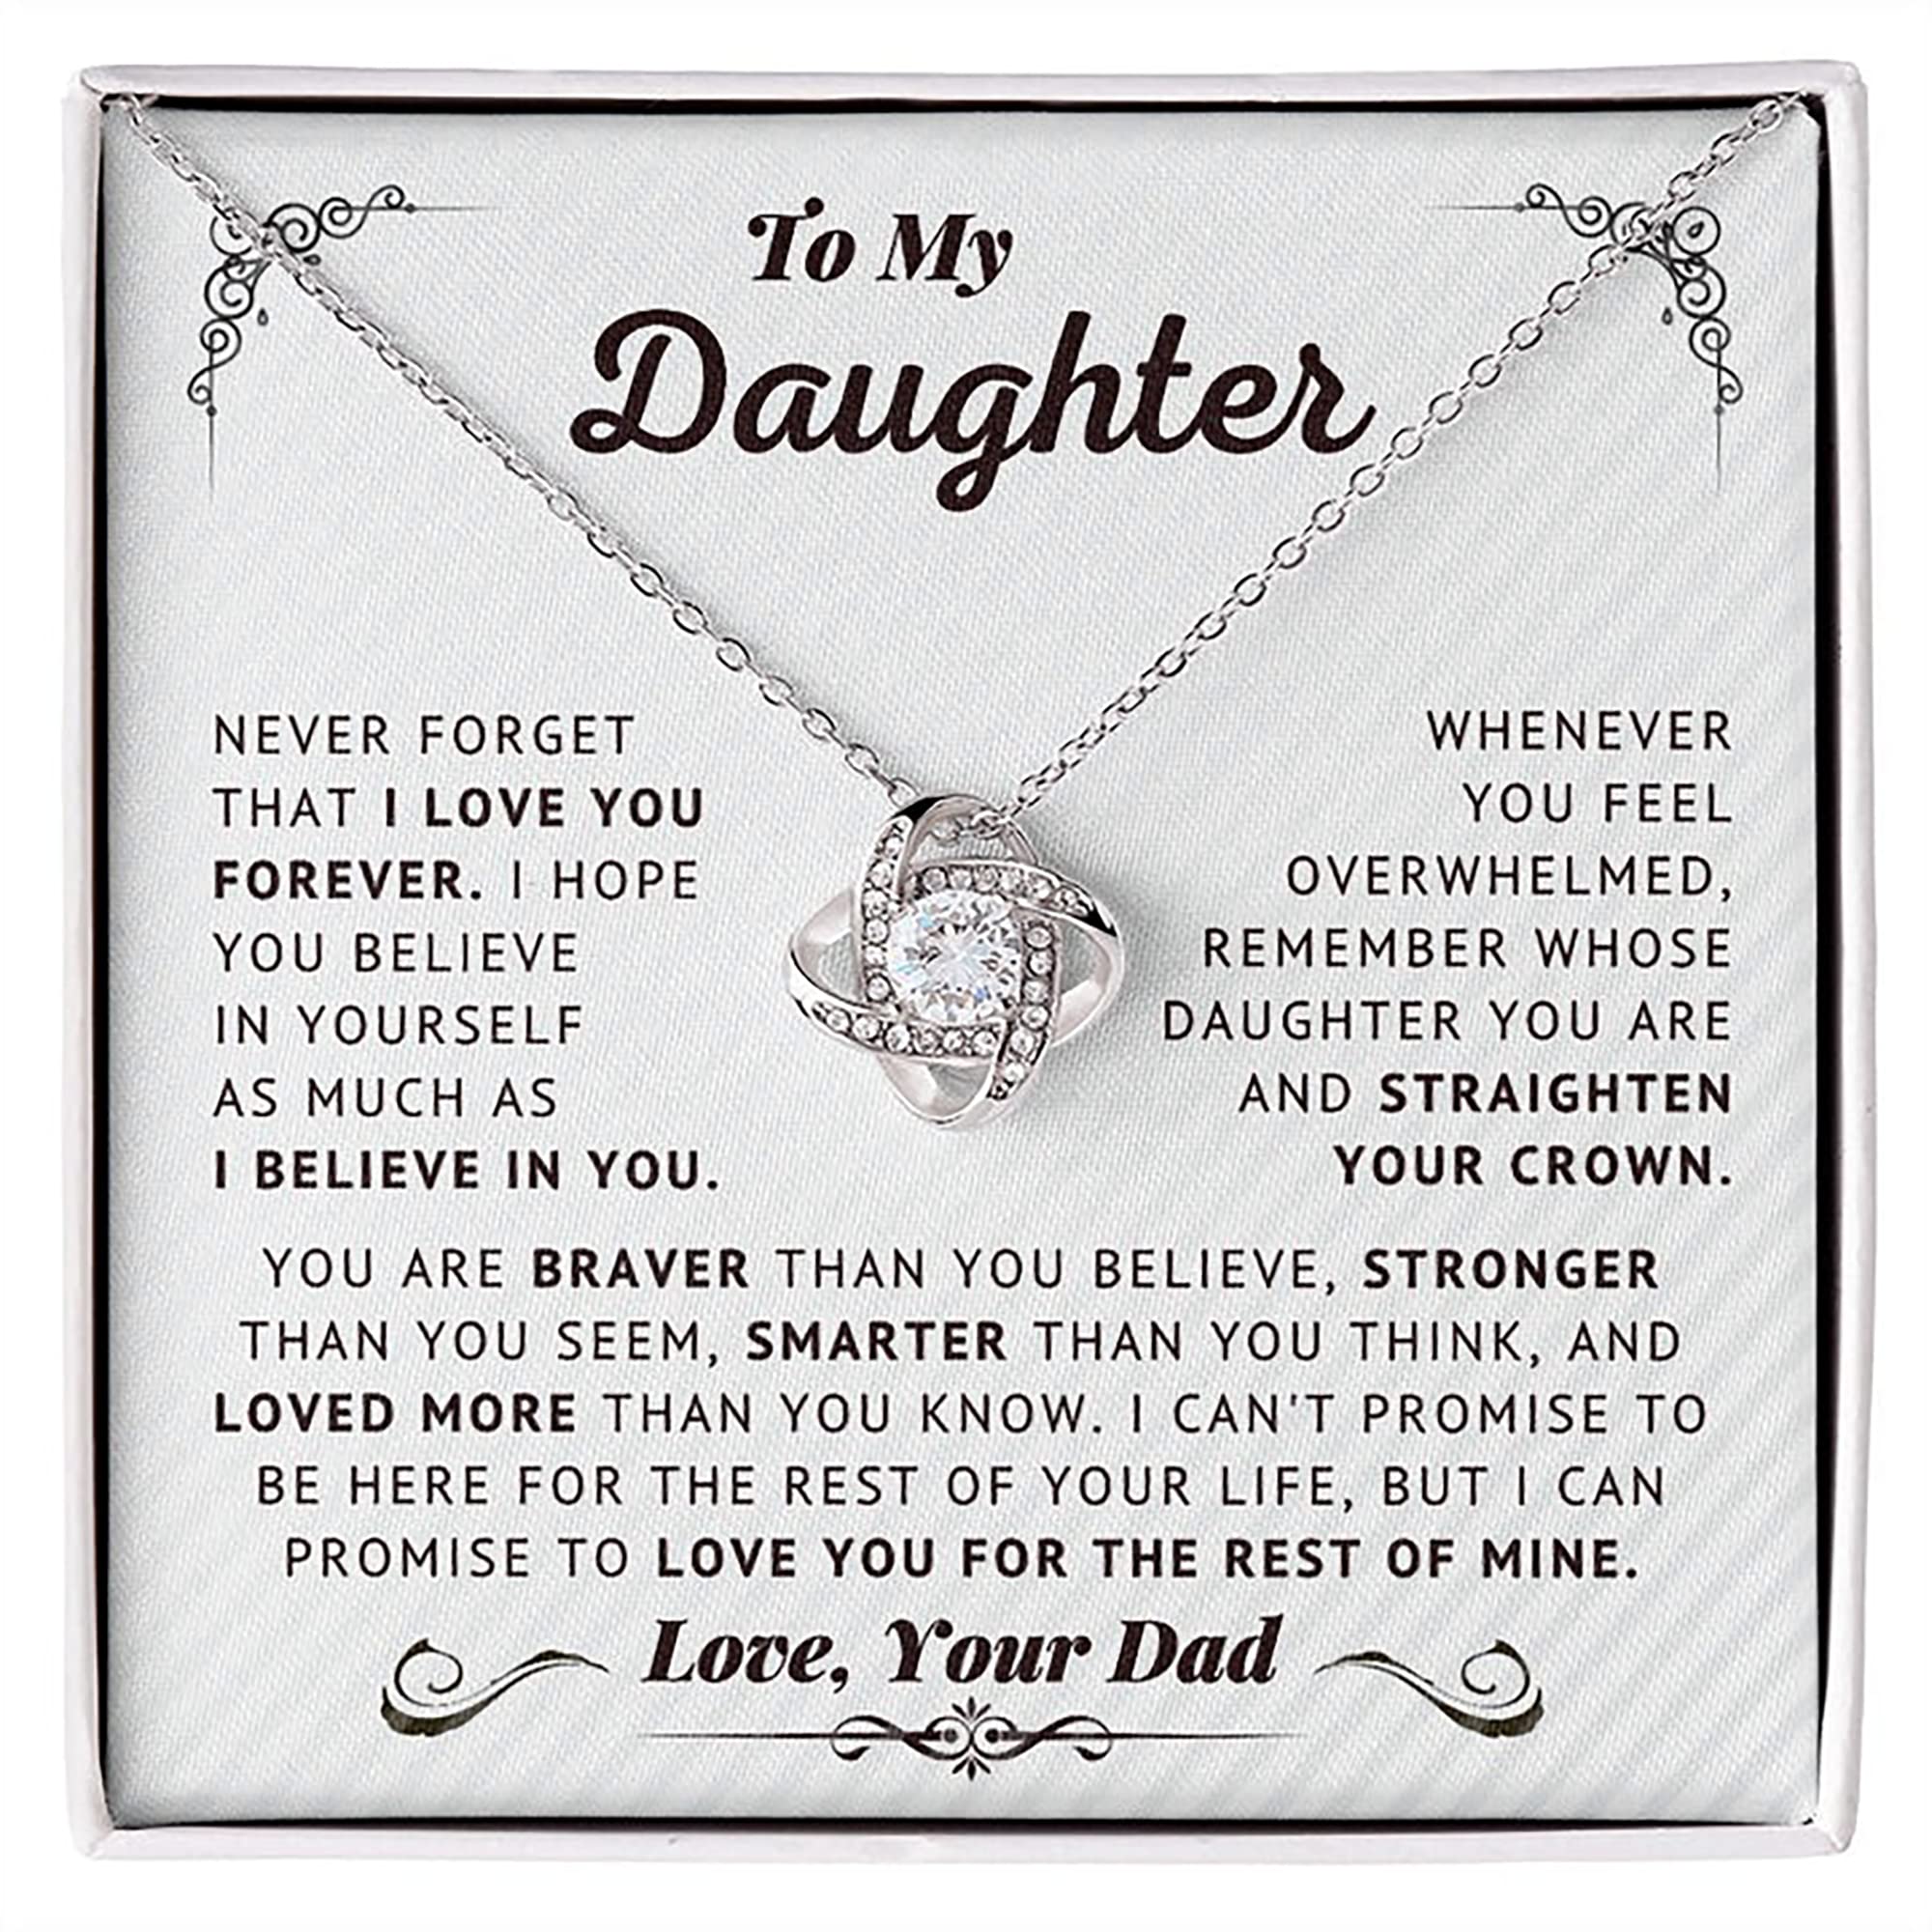 Believe in yourself gift necklace - FREE ENGRAVING